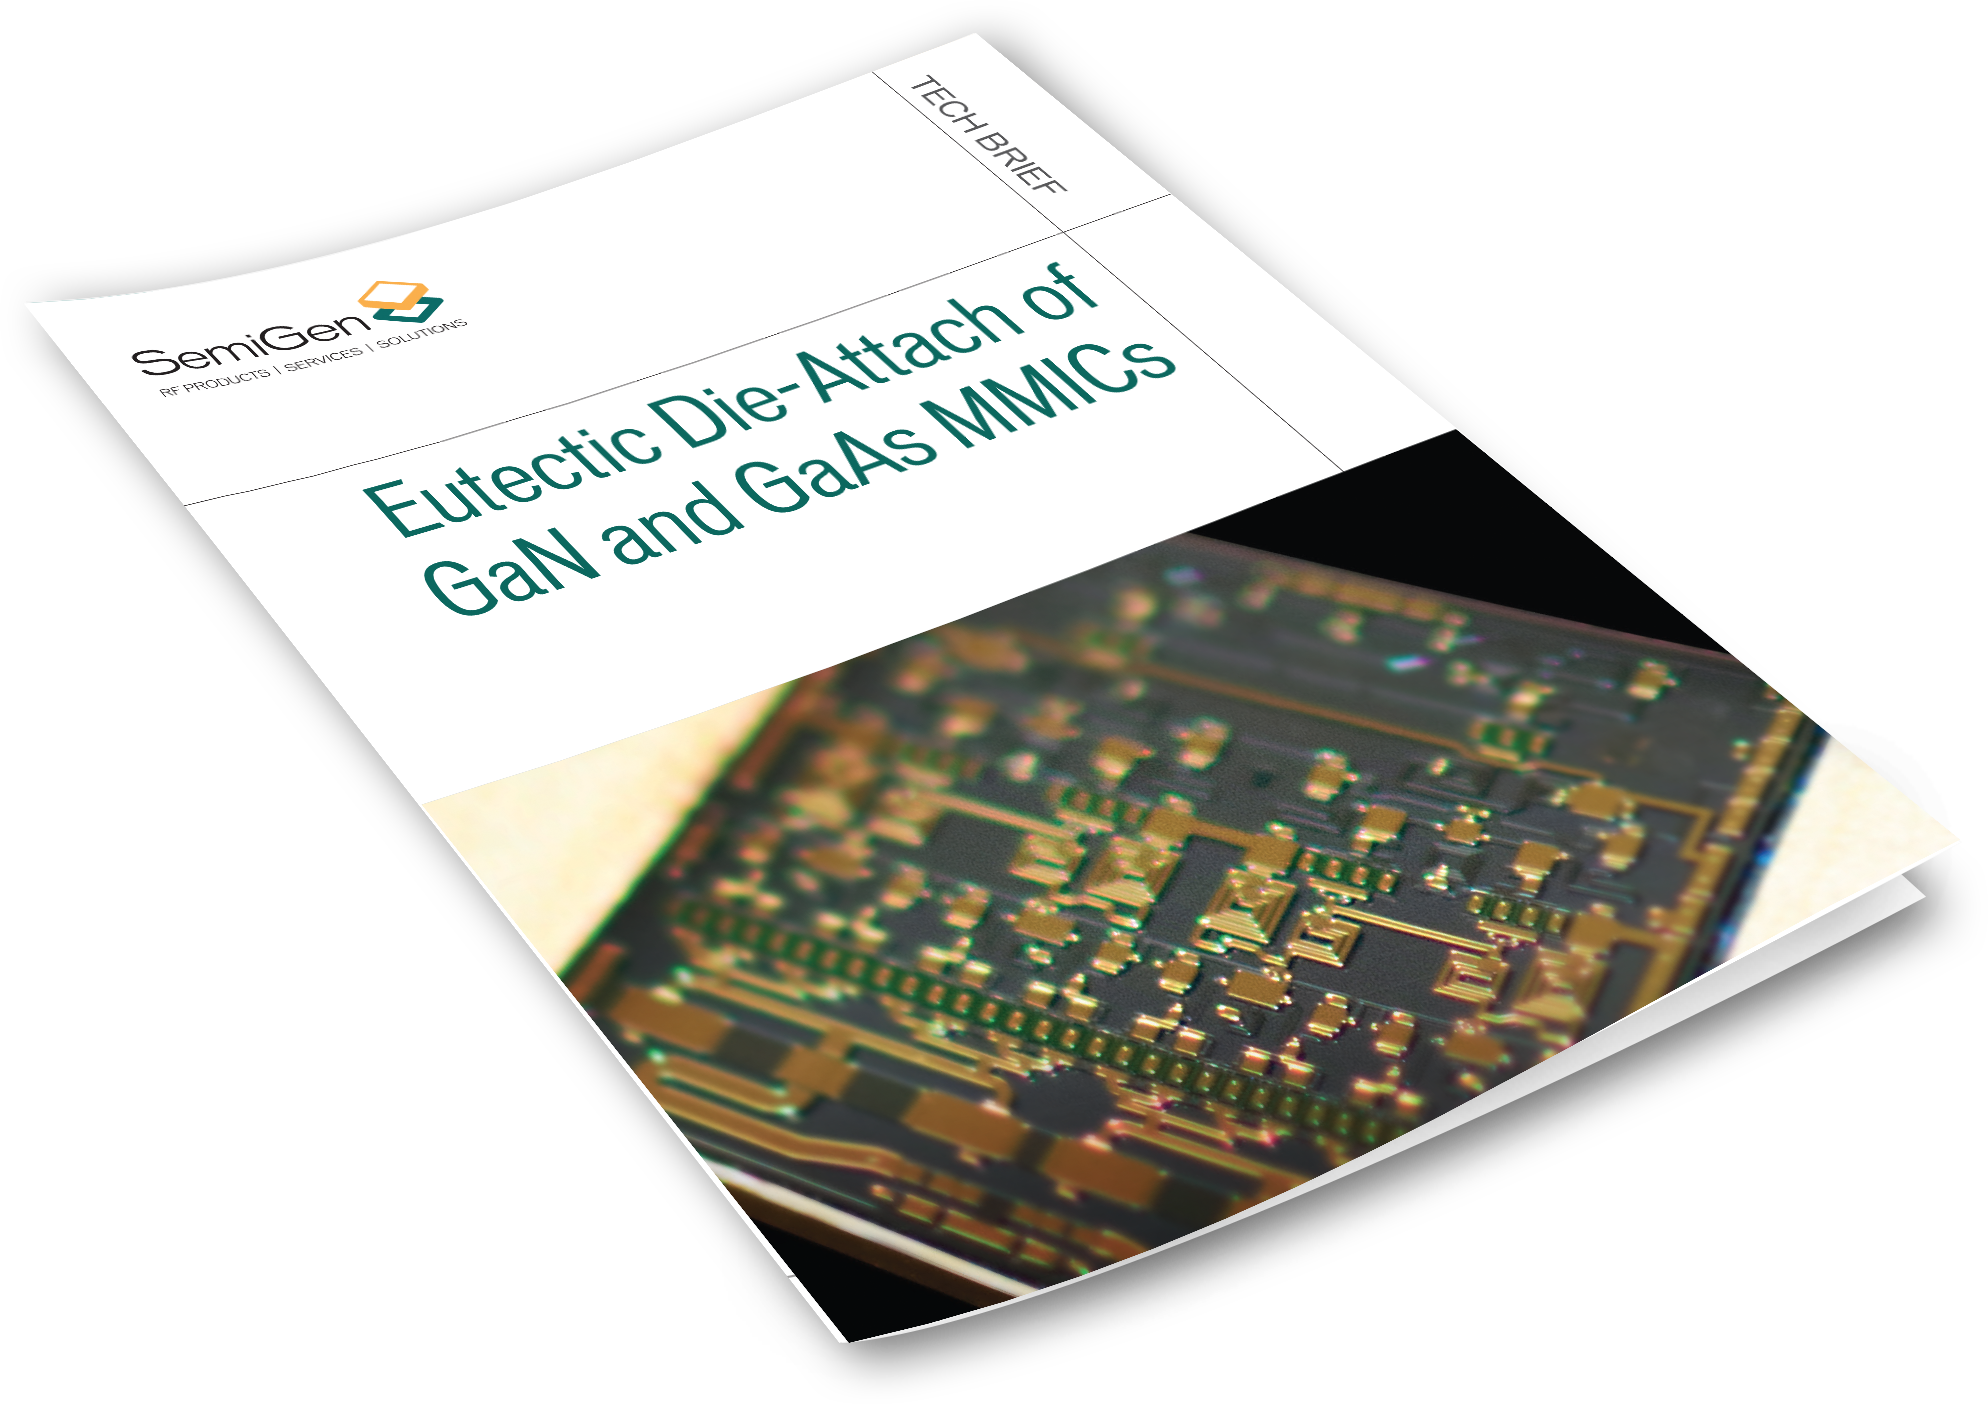 Tech Brief Describes the Best Eutectic Die-attach Method for MMICs in Hybrid Assemblies